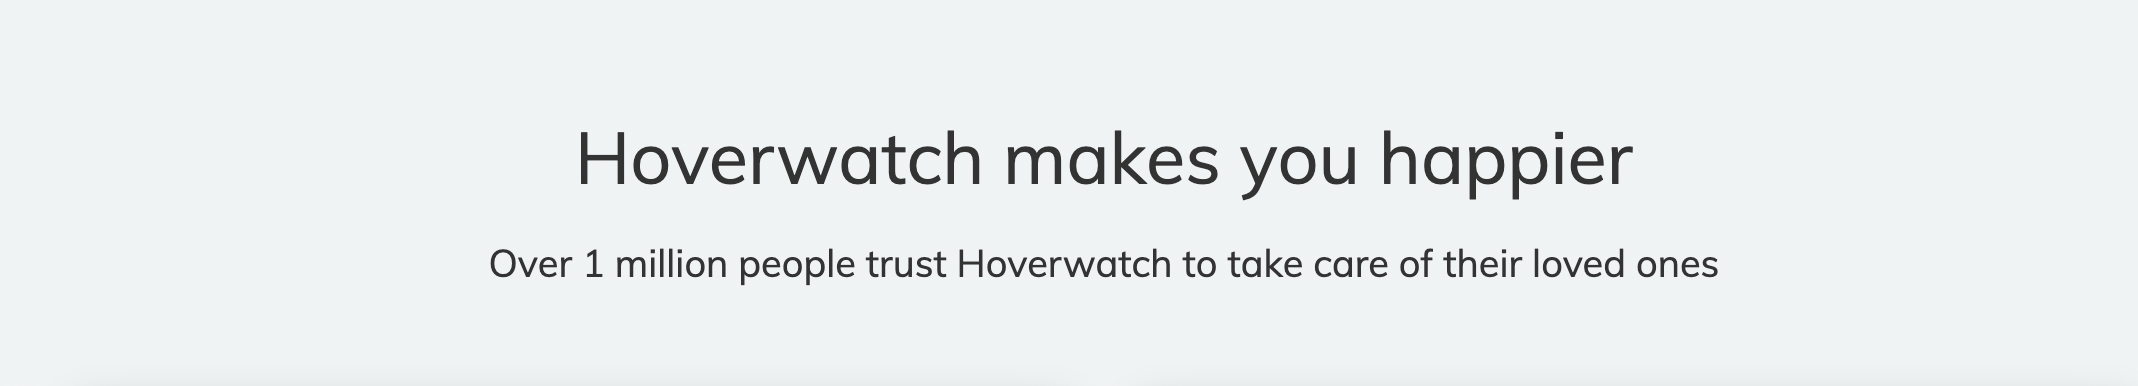 Hoverwatch is one of the most used spying apps in the world.